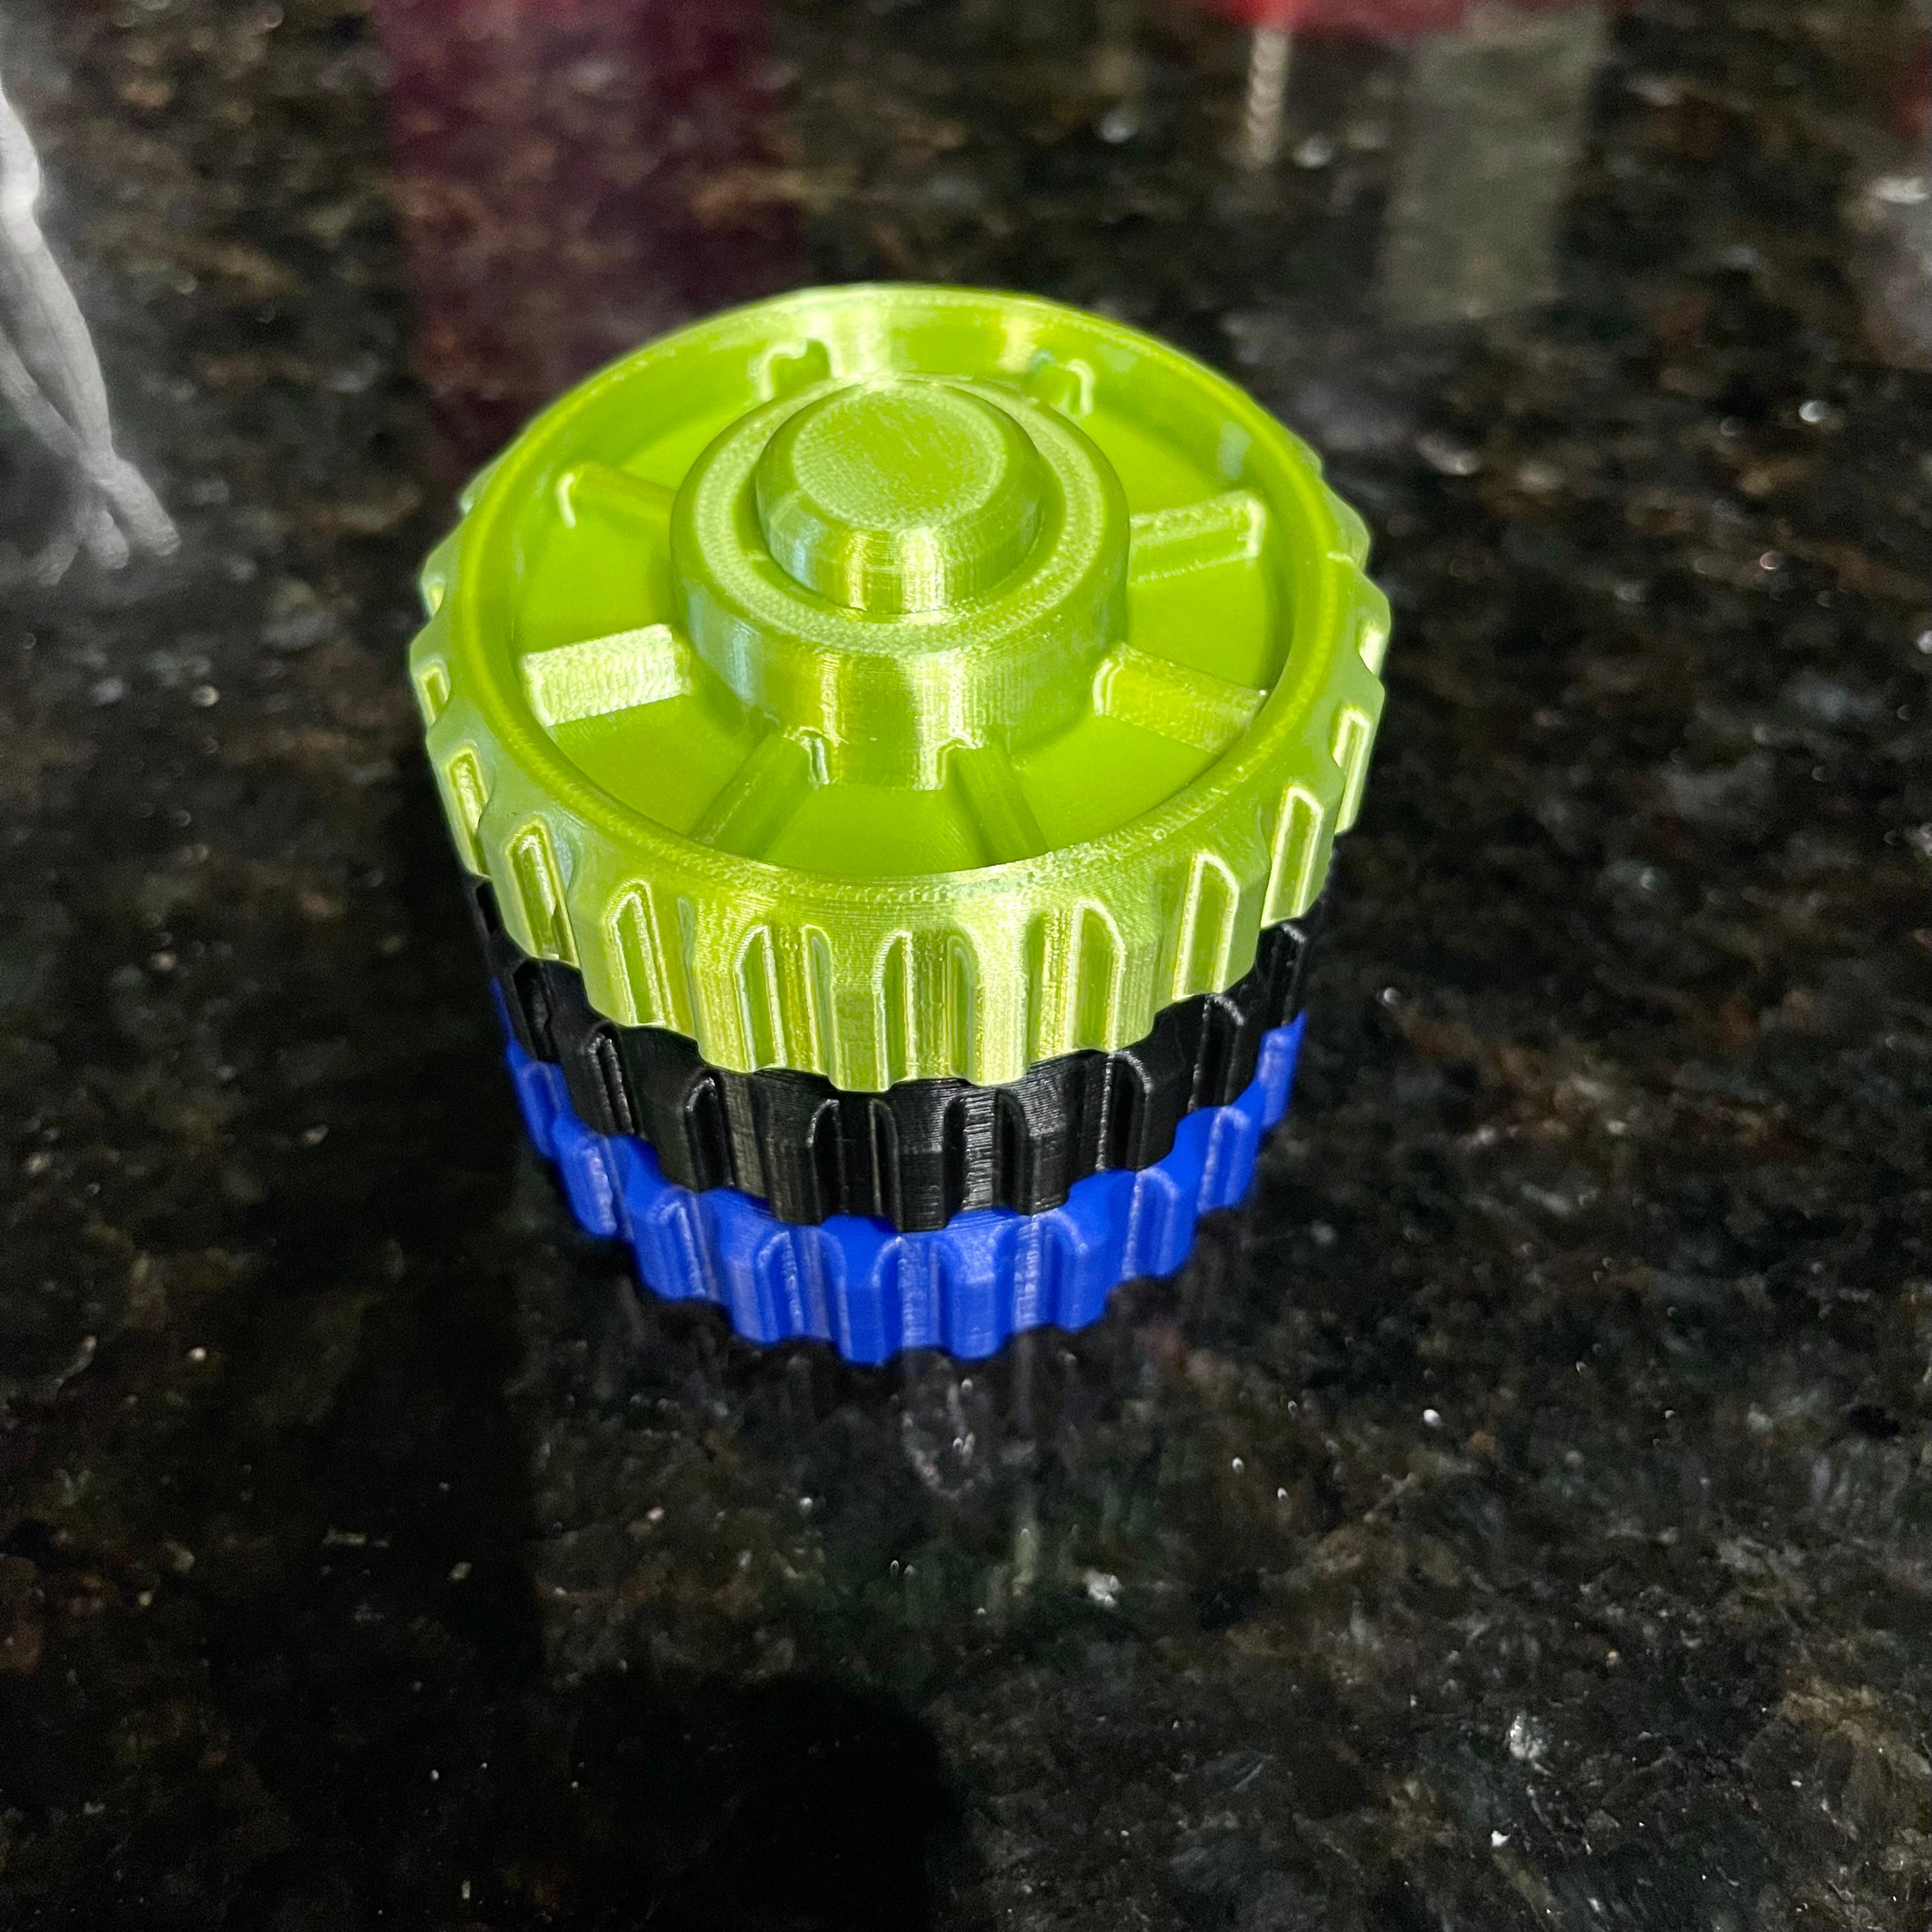 The Impossible Planetary Gear Fidget - Green is prusament lime green
Blue and black are hatchbox

Printed at .15 layer height on mk3s+ - 3d model